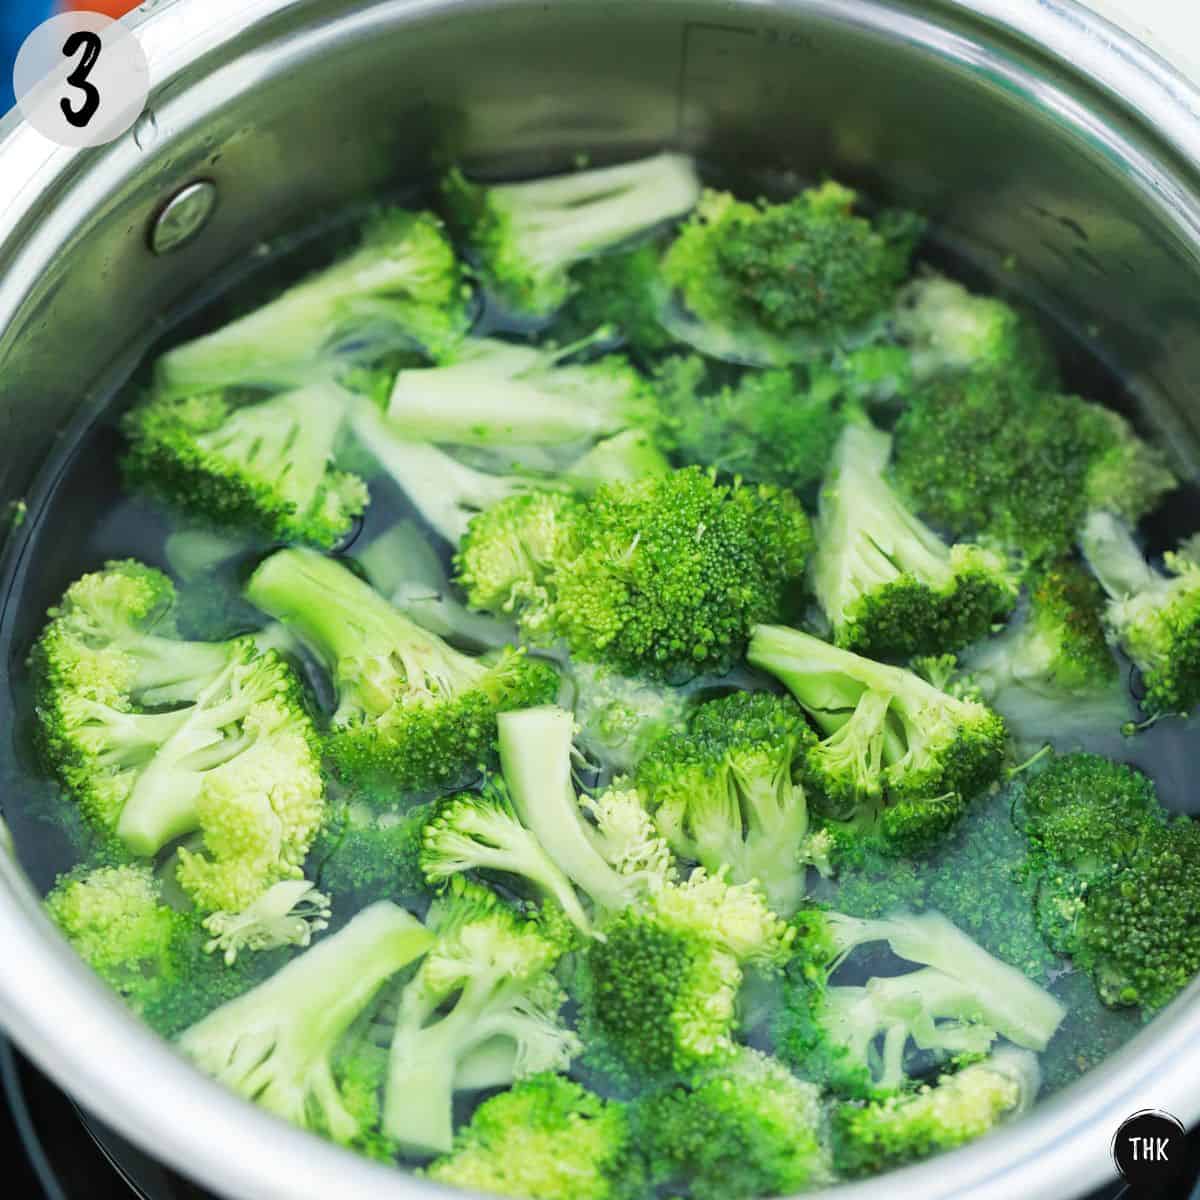 Broccoli florets in large pot of water.